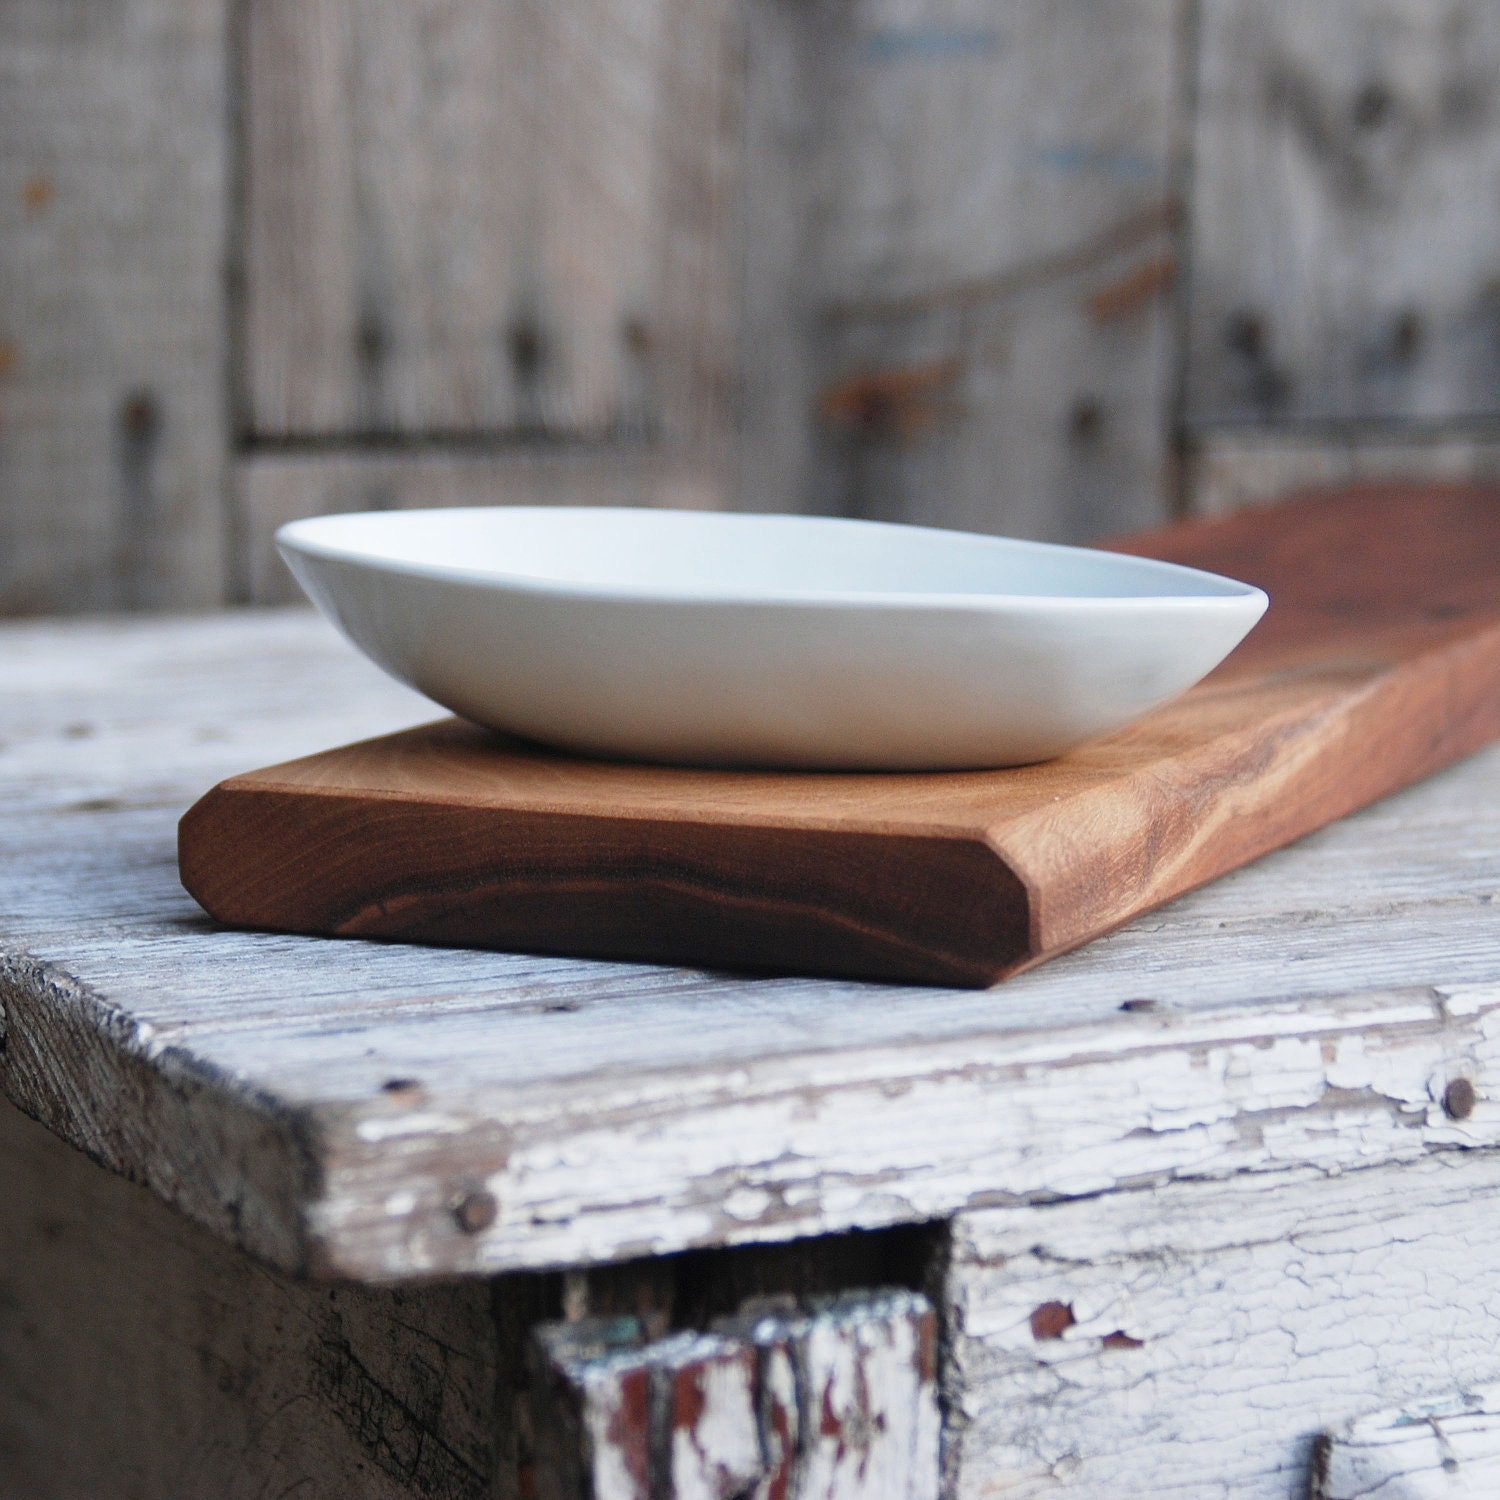 Baguette Board with Olive Bowl - Limited Edition Collaboration - wood and porcelain - PegandAwl